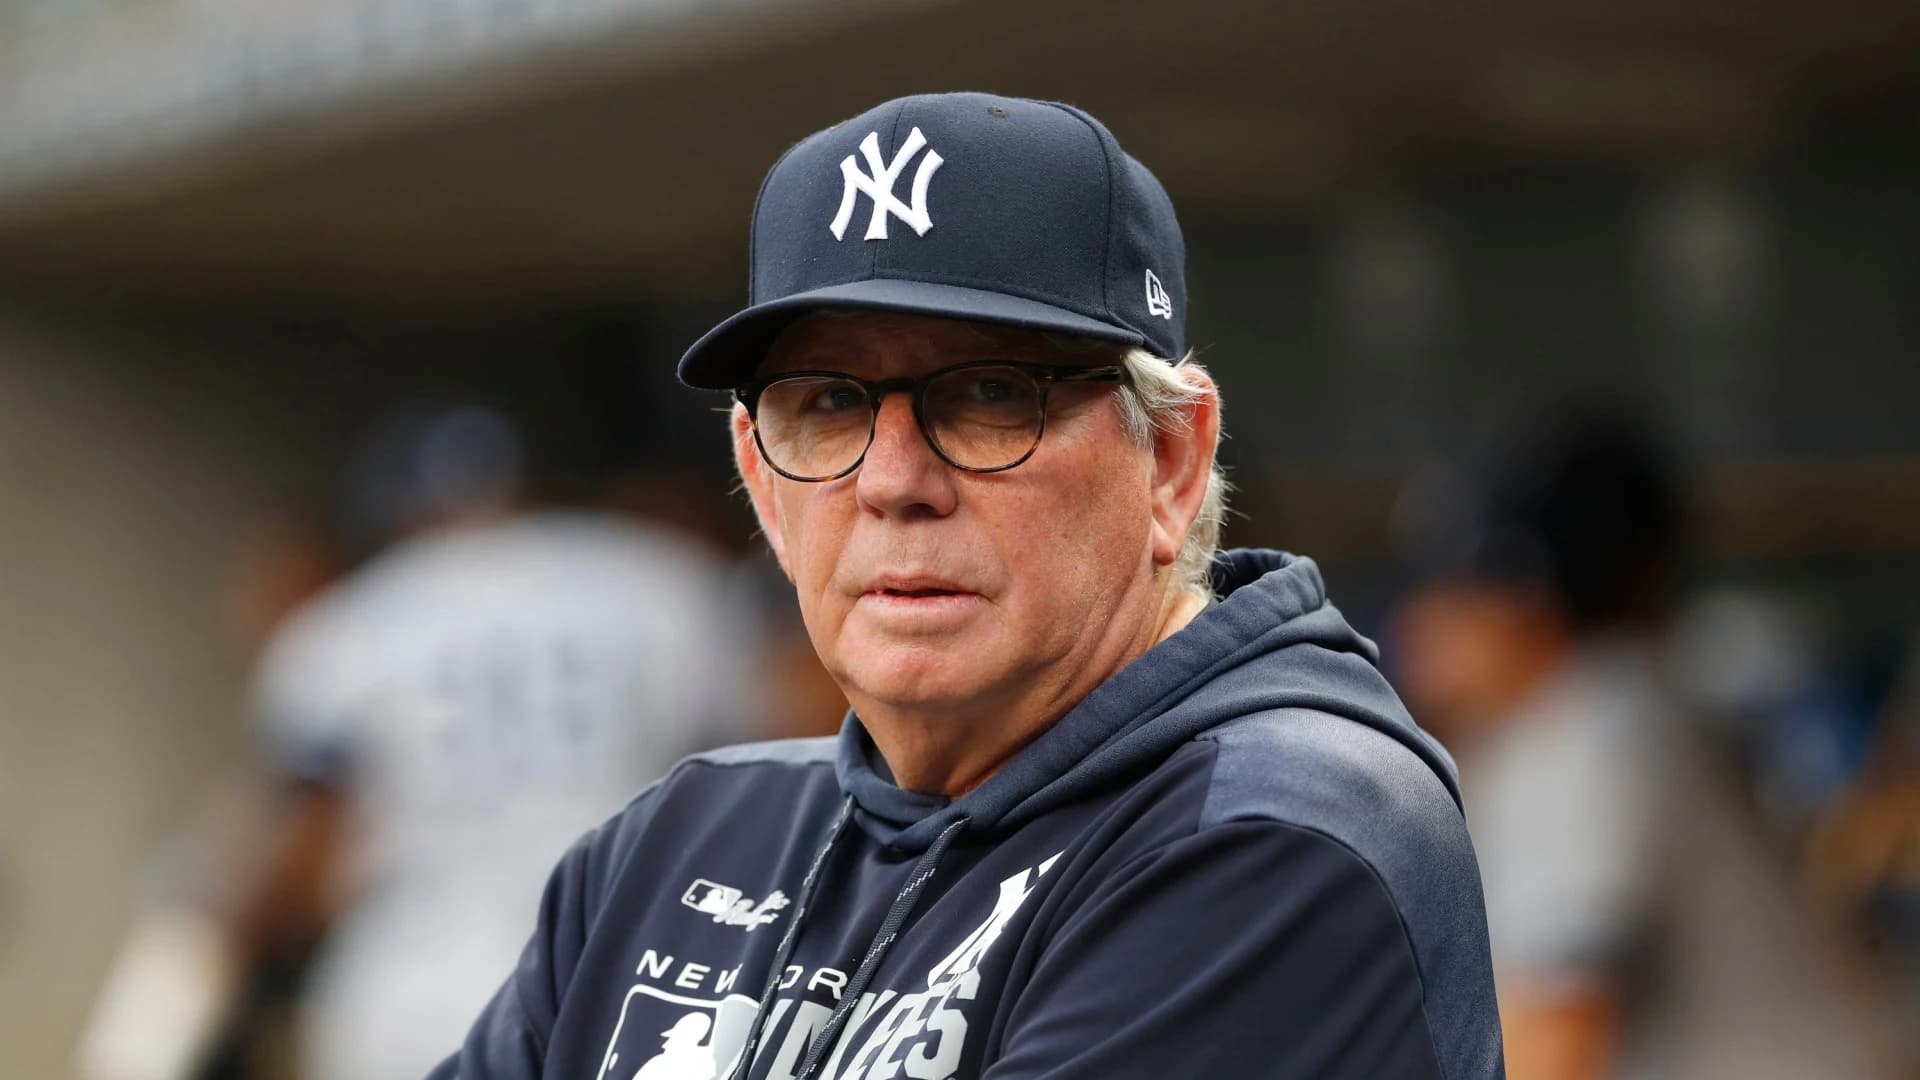 Yankees pitching coach Rothschild fired after 9 seasons